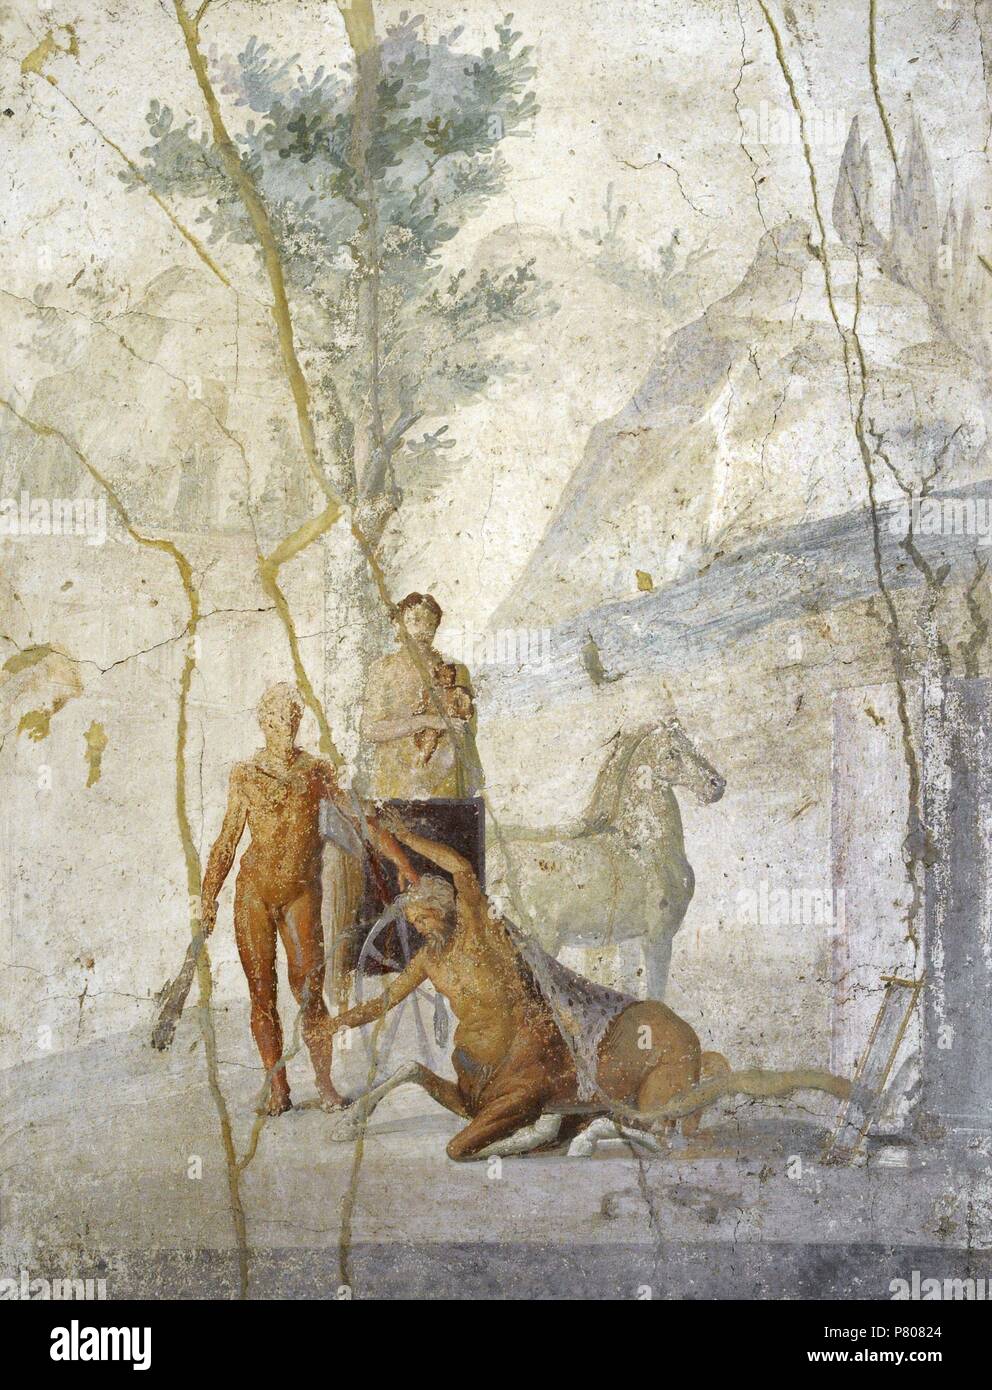 Roman fresco depicting Heracles grabbing the centaur Nessus by the hair. Behind them, Deianira. House of Jason (20-25 AD). Pompeii. National Archaeological Museum. Naples. Italy. Stock Photo